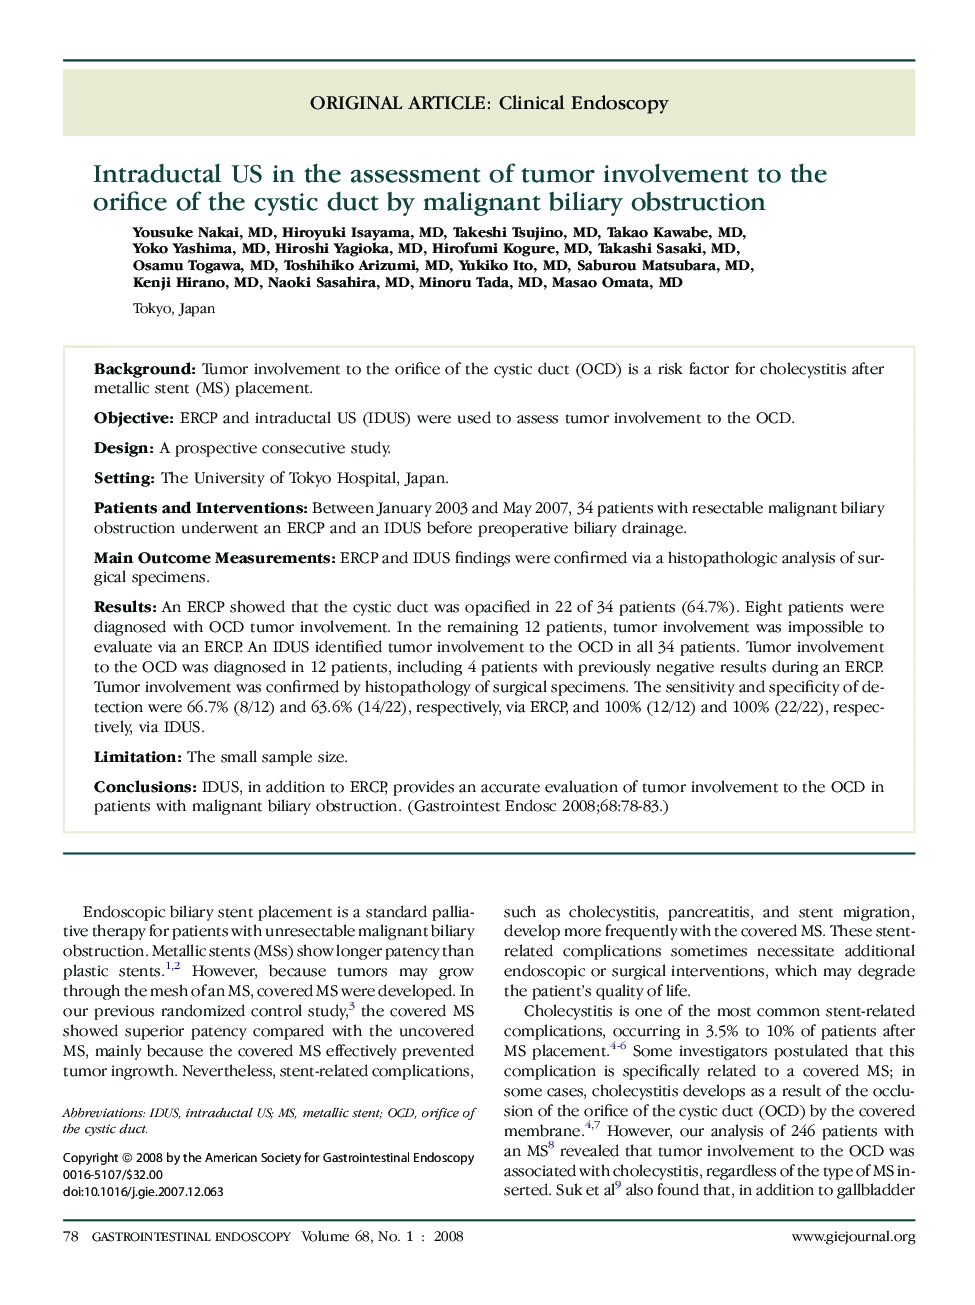 Intraductal US in the assessment of tumor involvement to the orifice of the cystic duct by malignant biliary obstruction